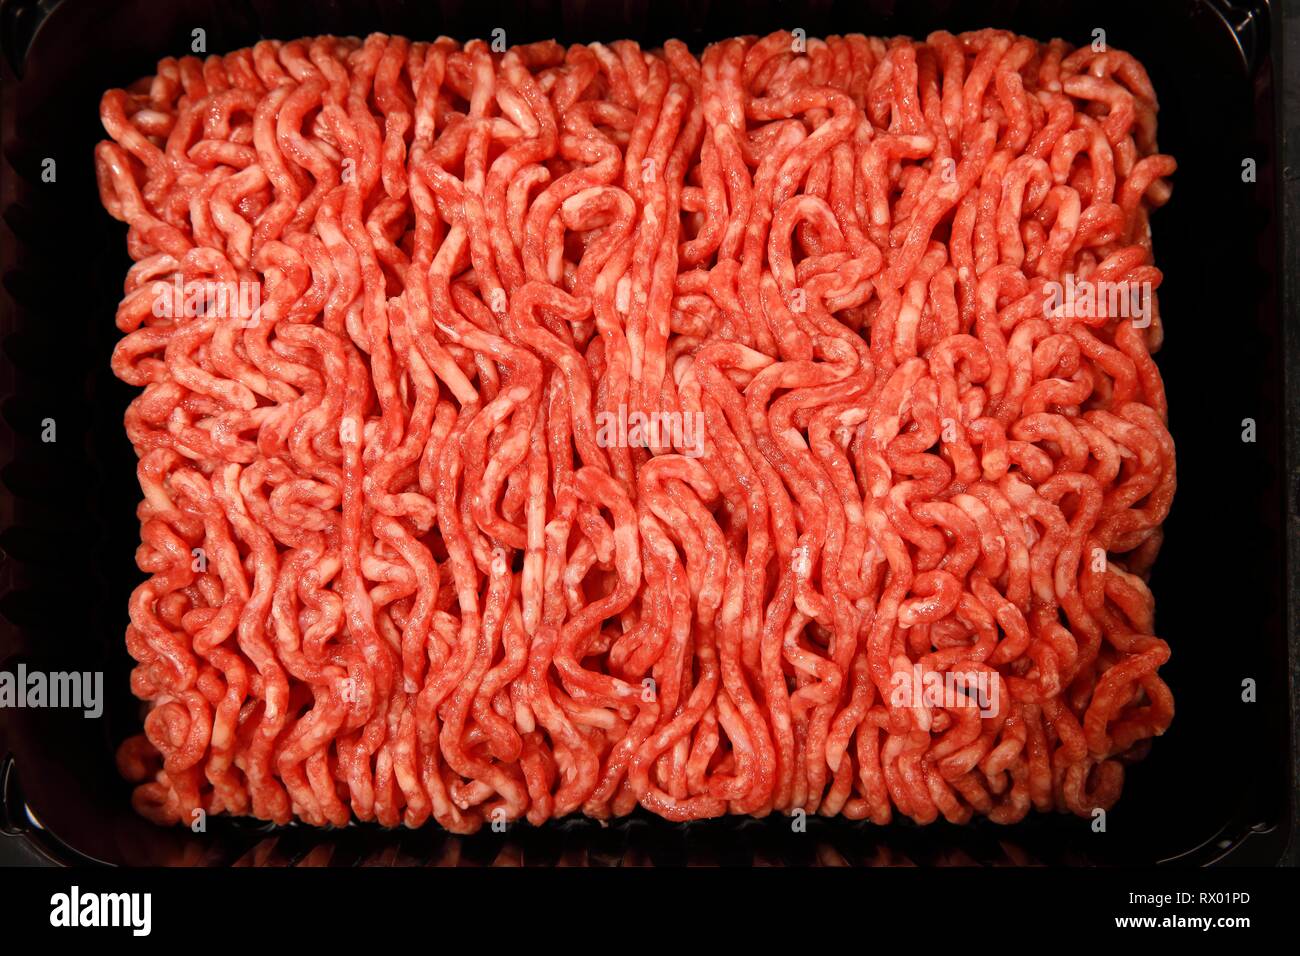 Fresh minced meat, ground beef, Germany Stock Photo